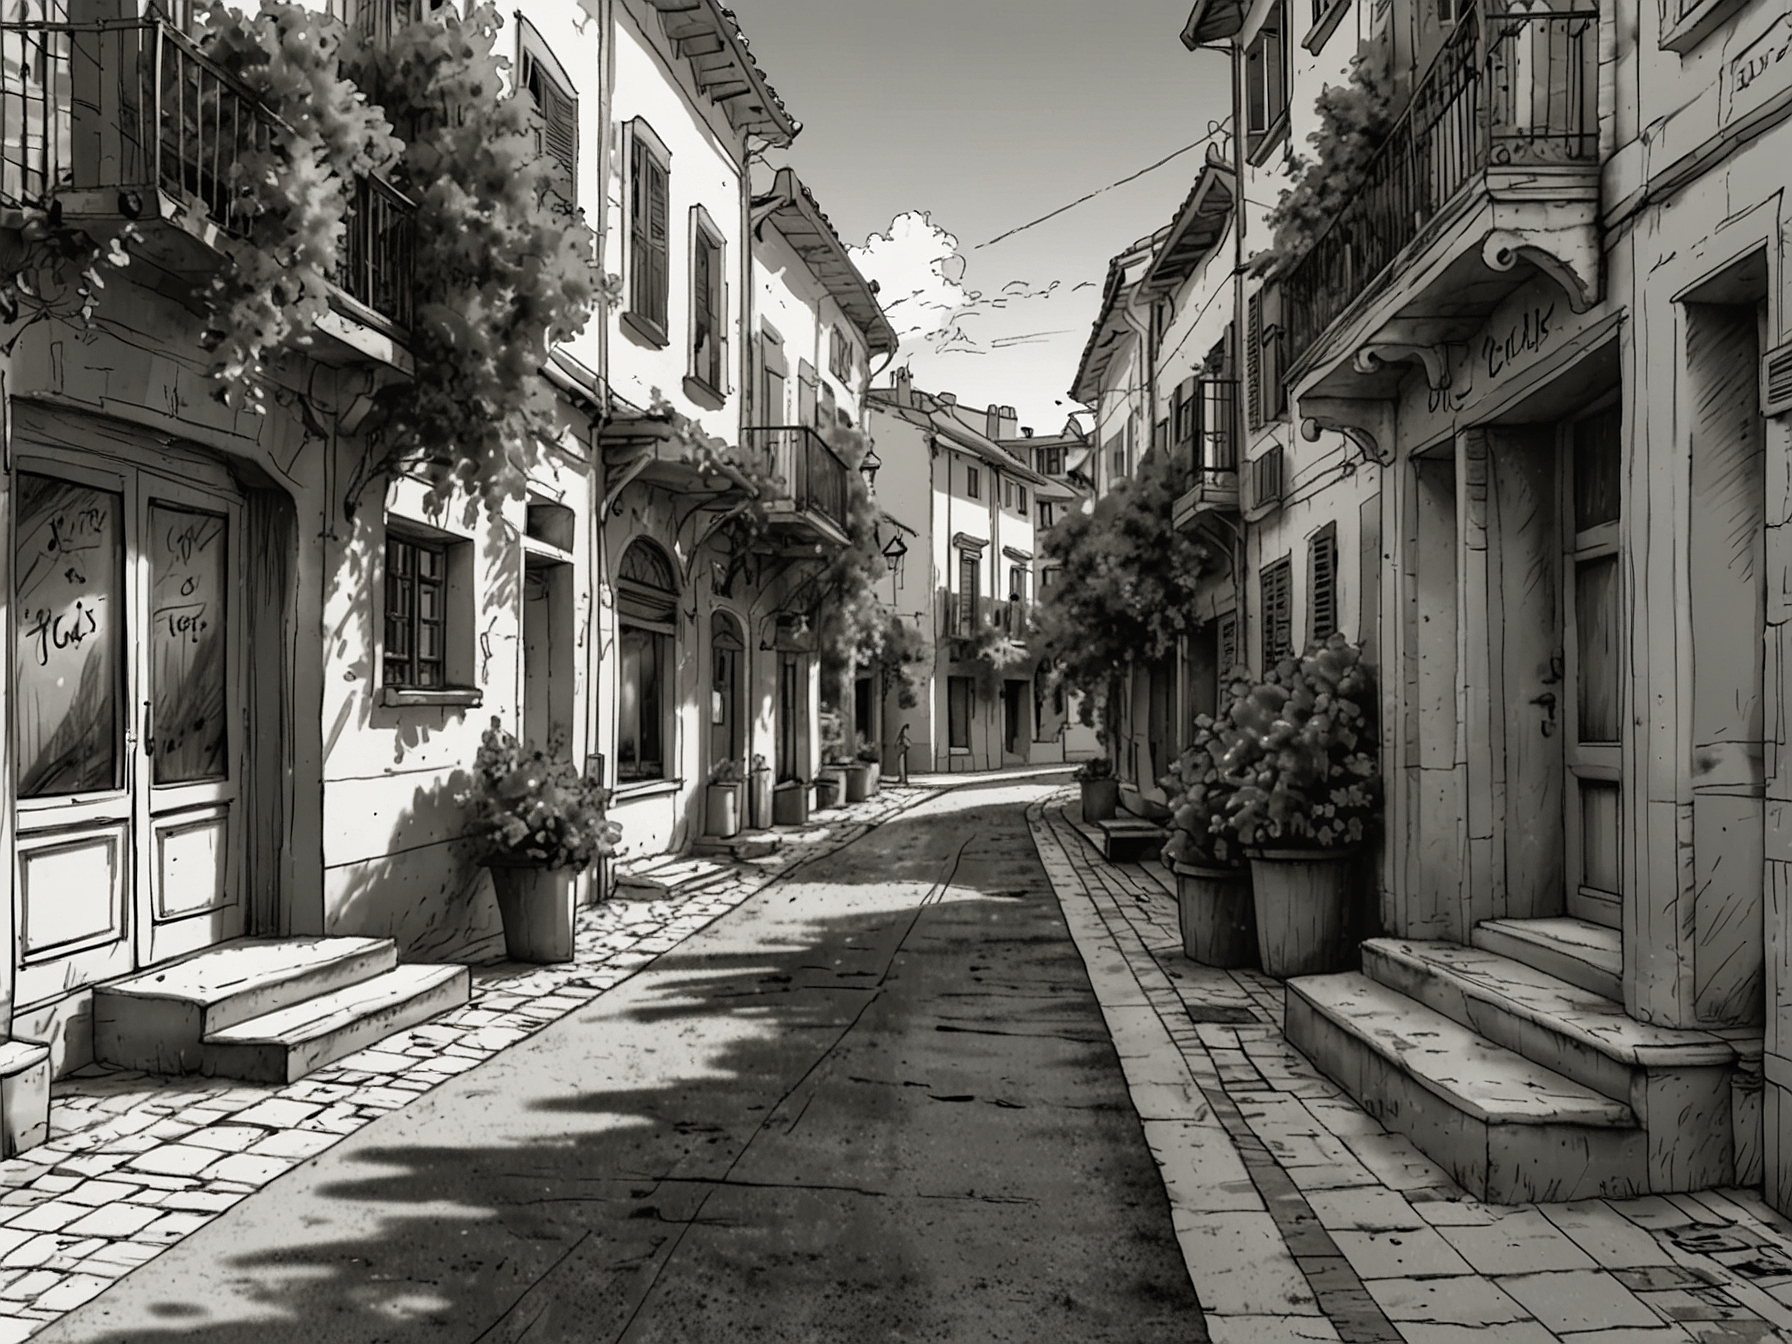 An idyllic street in a European coastal town, where tourists seek refuge in shaded areas and enjoy the cooling sea breeze to cope with extreme summer temperatures.